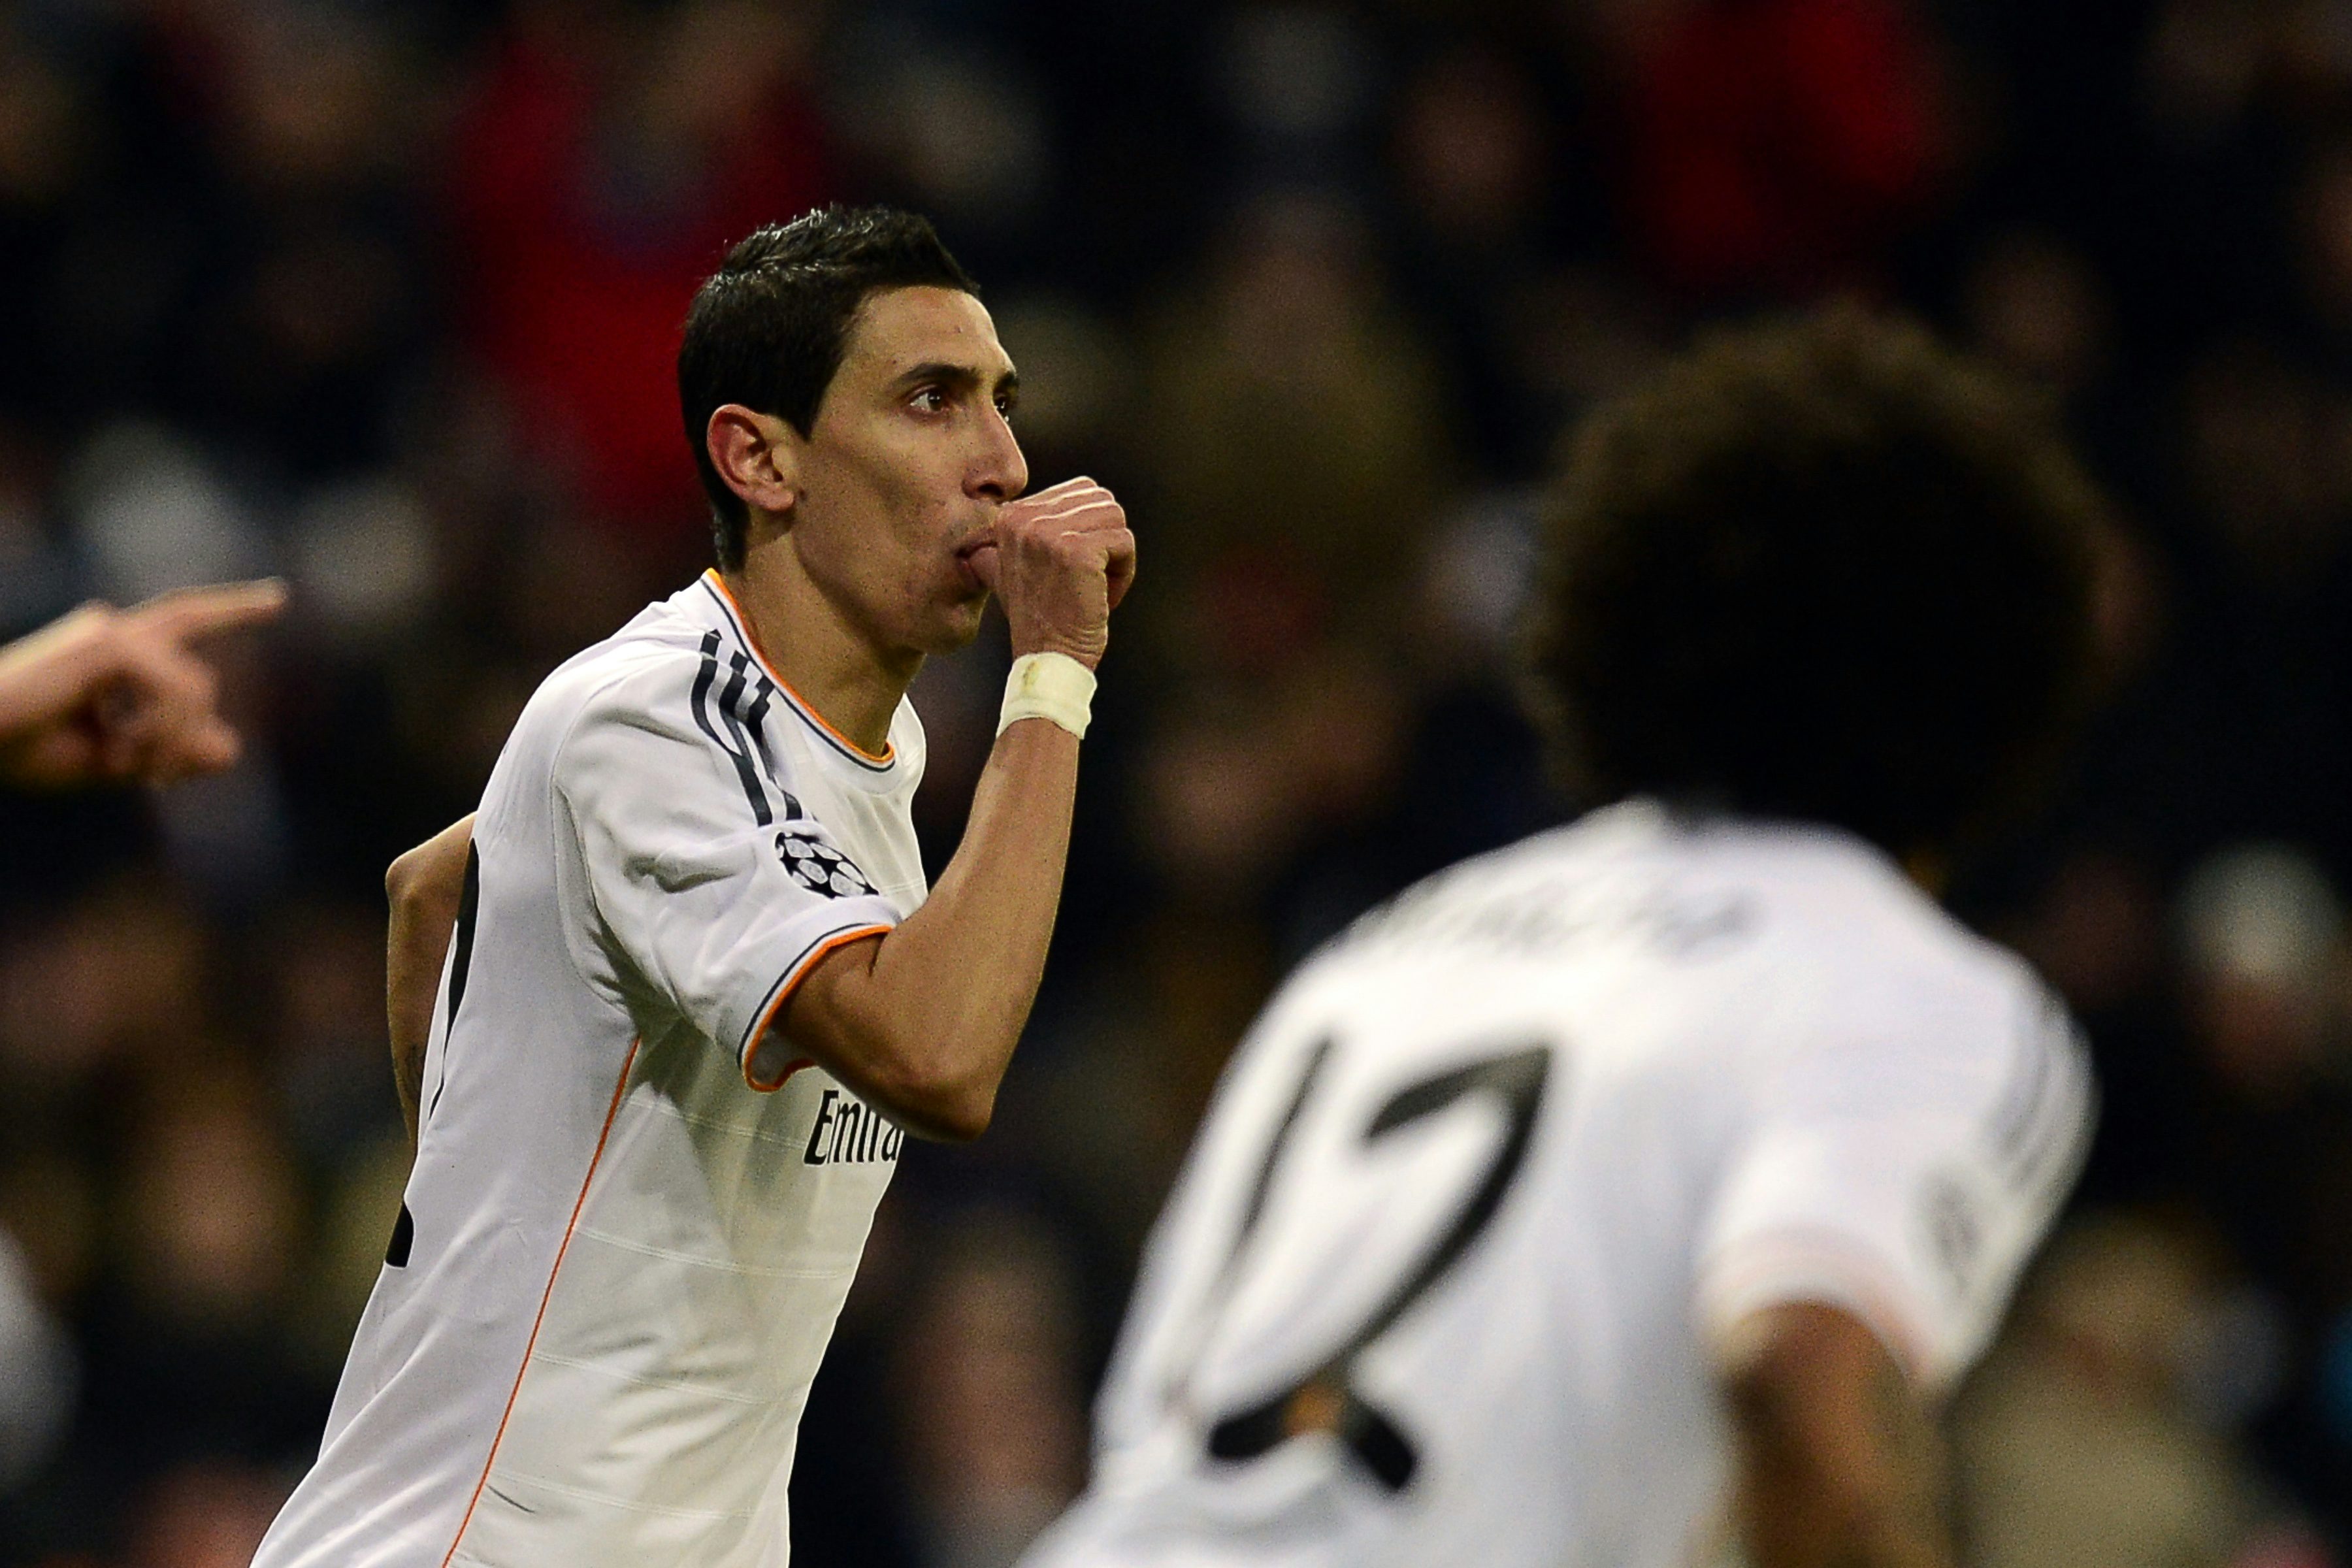 Real Madrid' Angel di Maria celebrates after scoring his team's third goal against Galatasaray during their Champions League group match on November 27, 2013